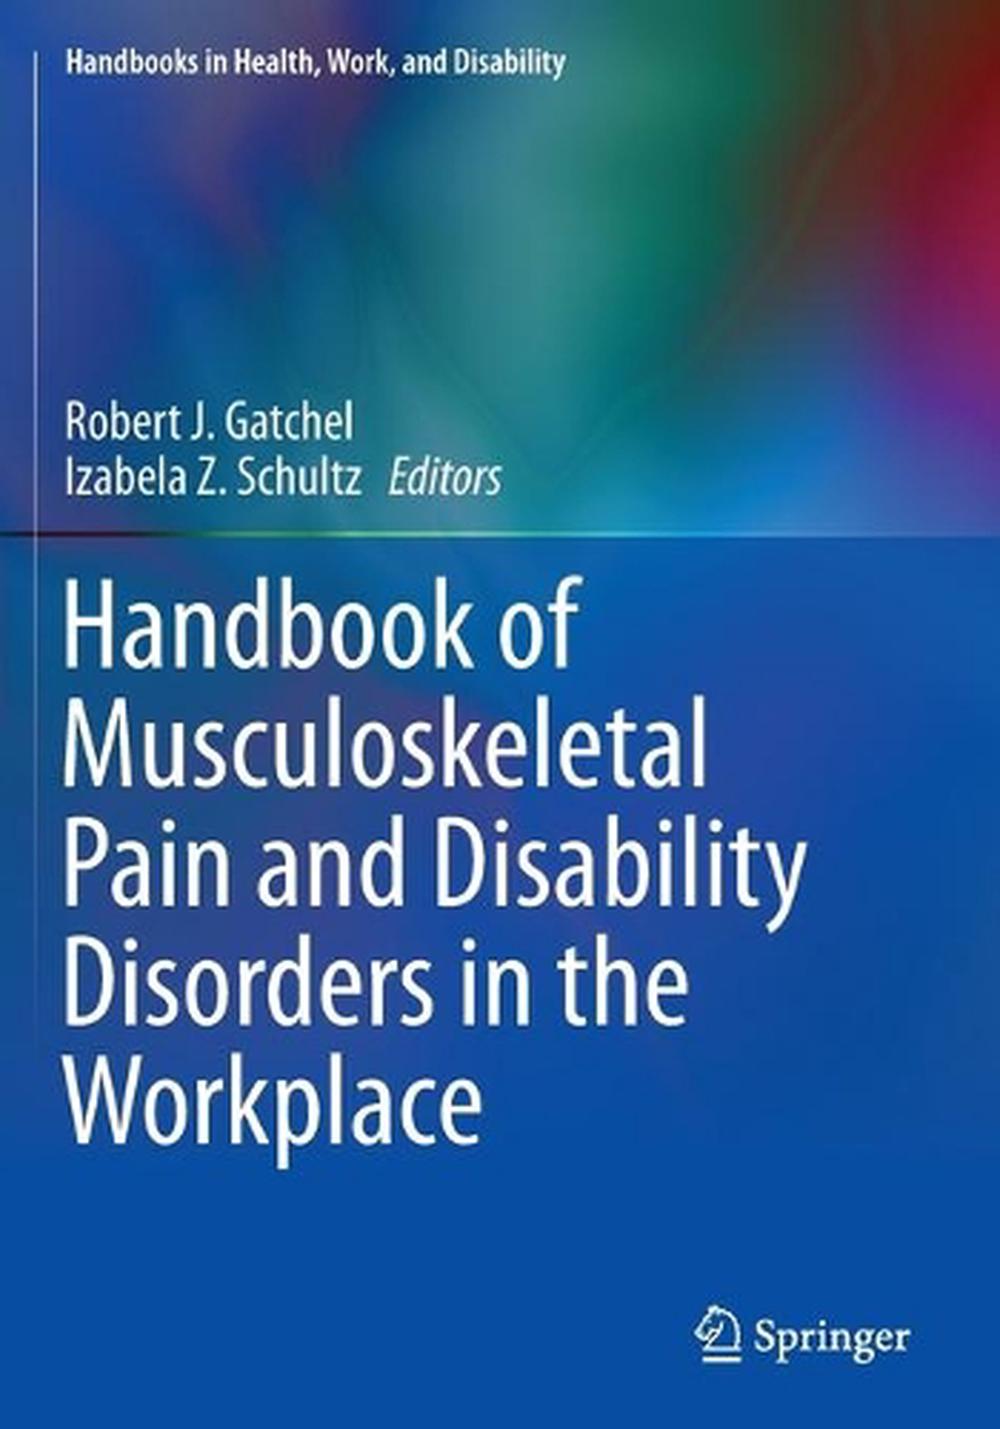 Handbook of Musculoskeletal Pain and Disability Disorders in the Workplace (Engl 9781493931996